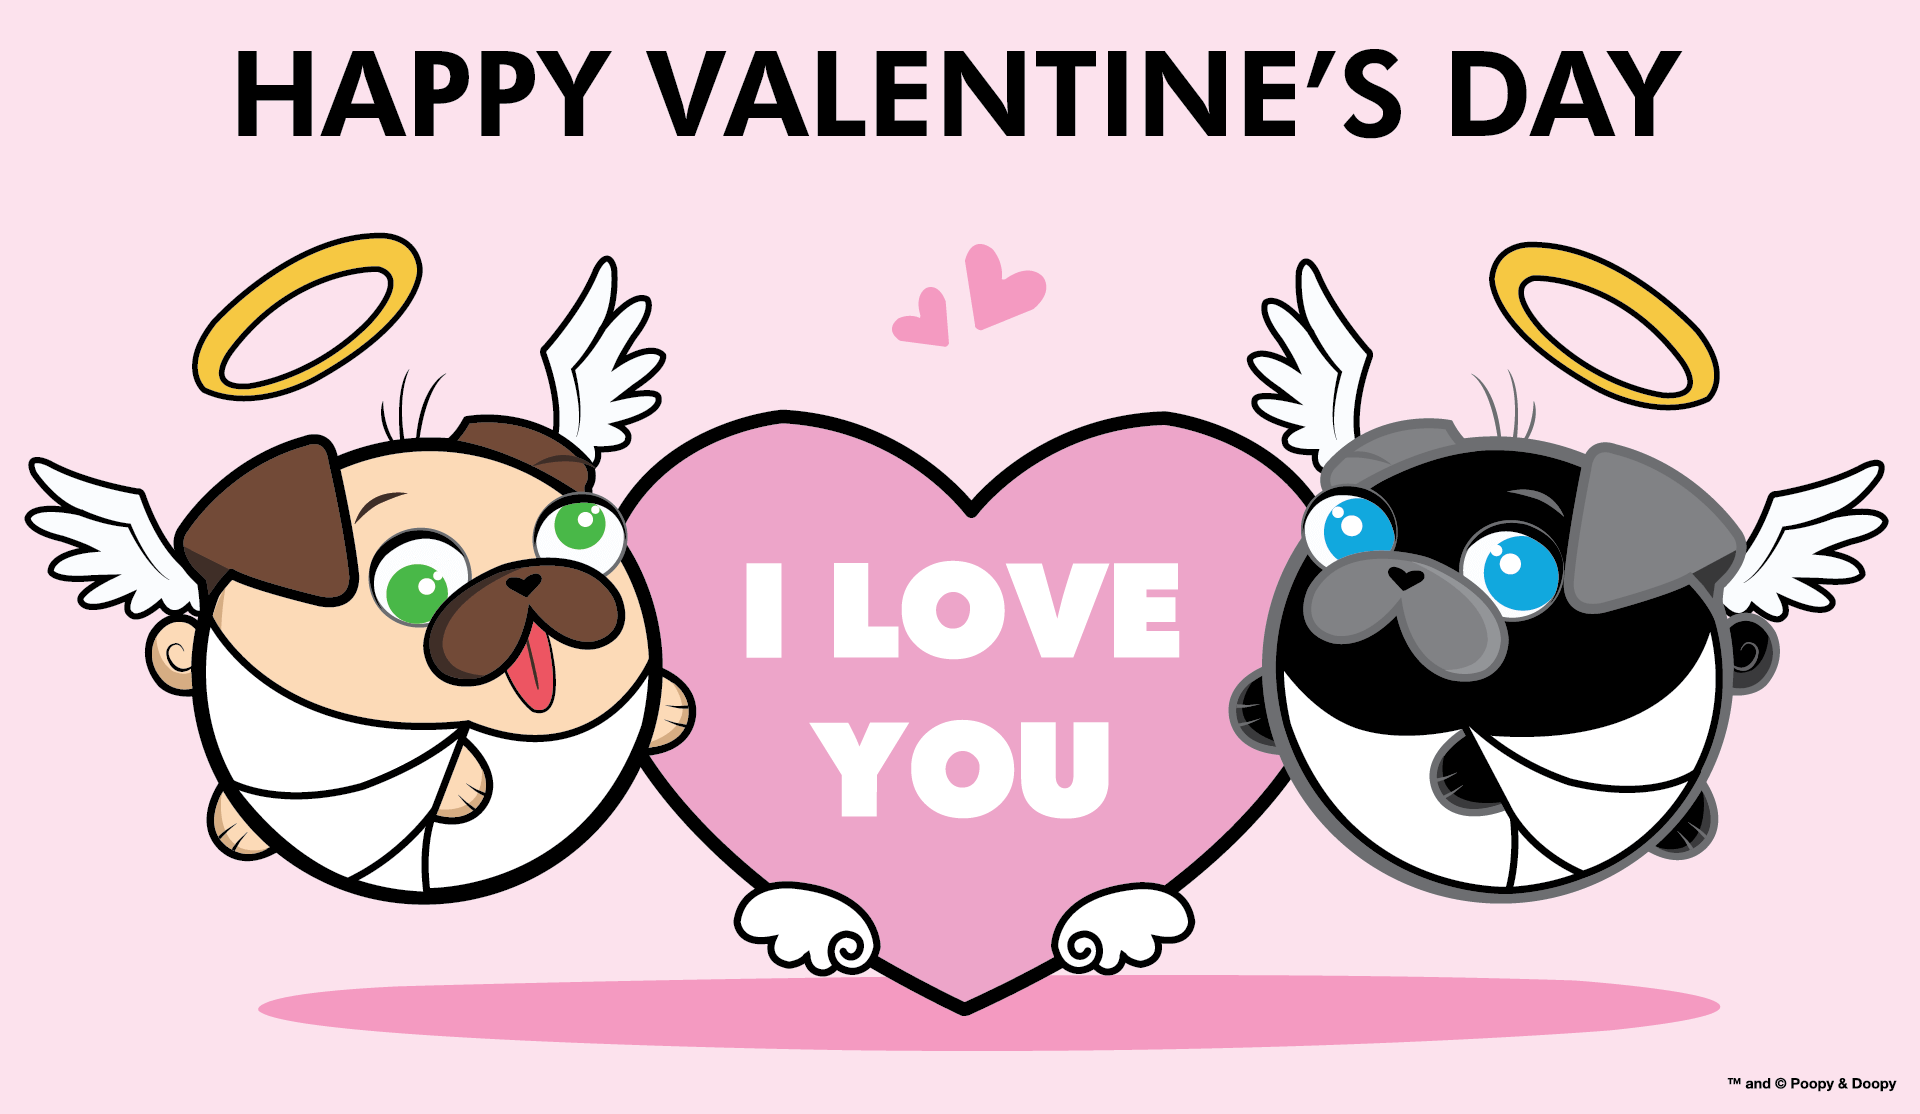 Poopy and Doopy - Valentine's Day